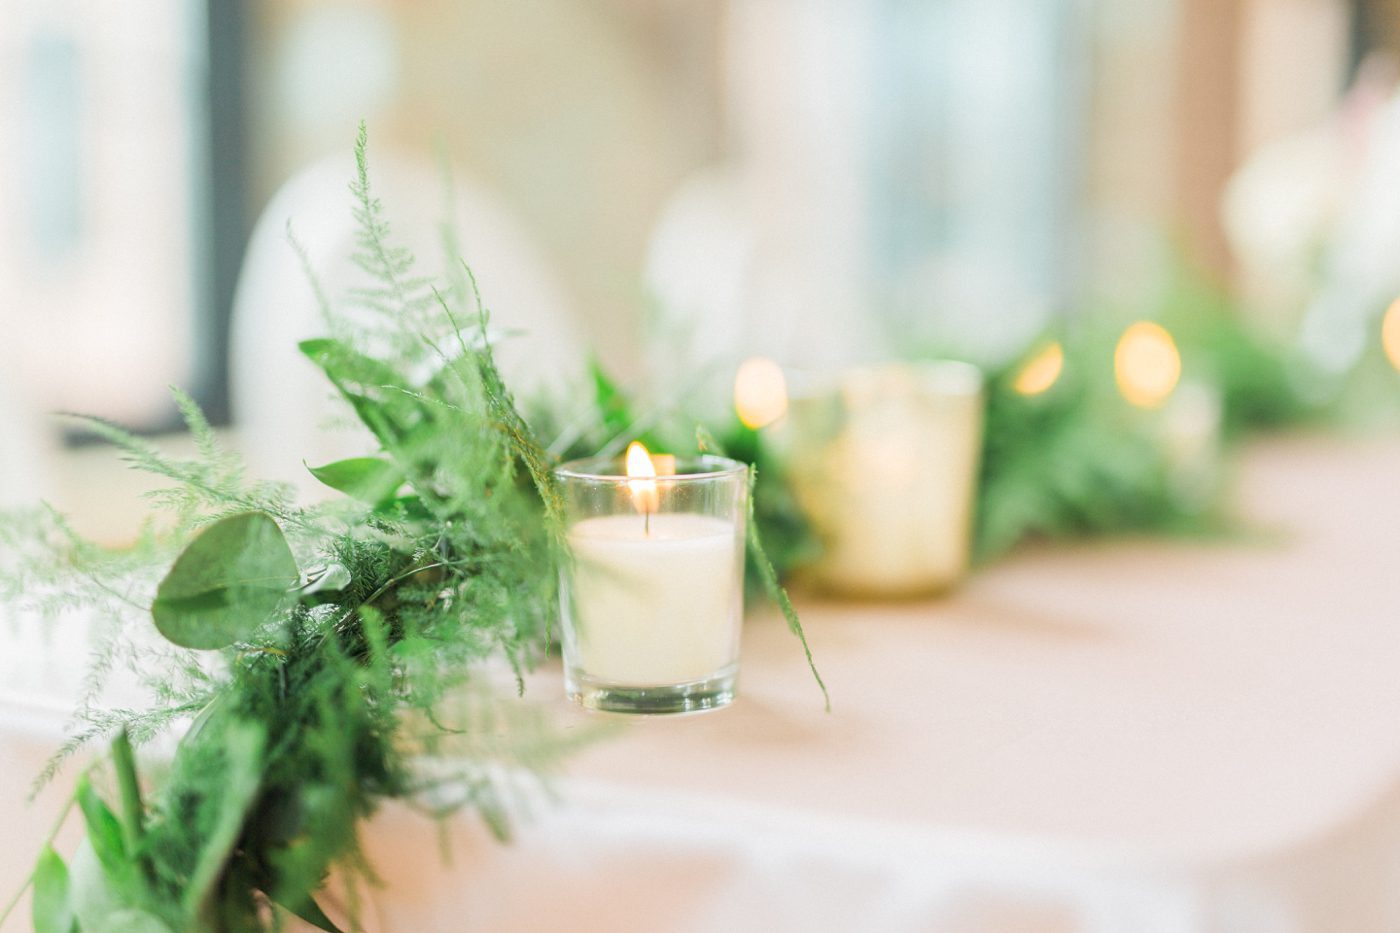 Candle lit reception with greenery table runner